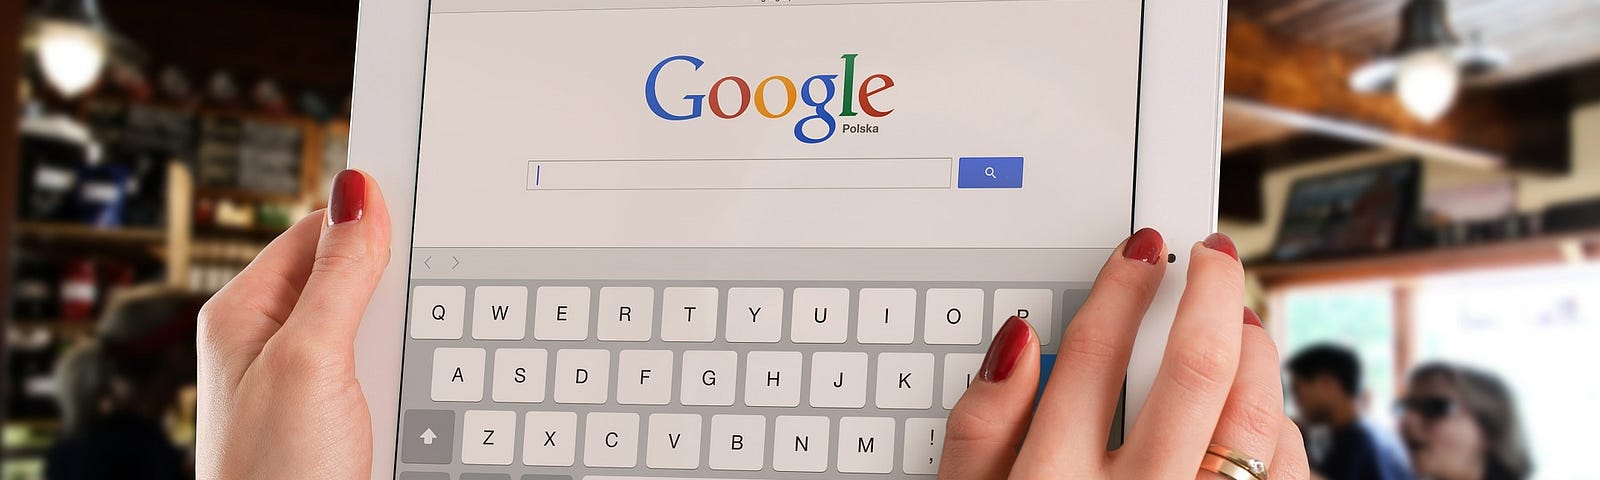 Woman holds up iPad with Google search page visible.